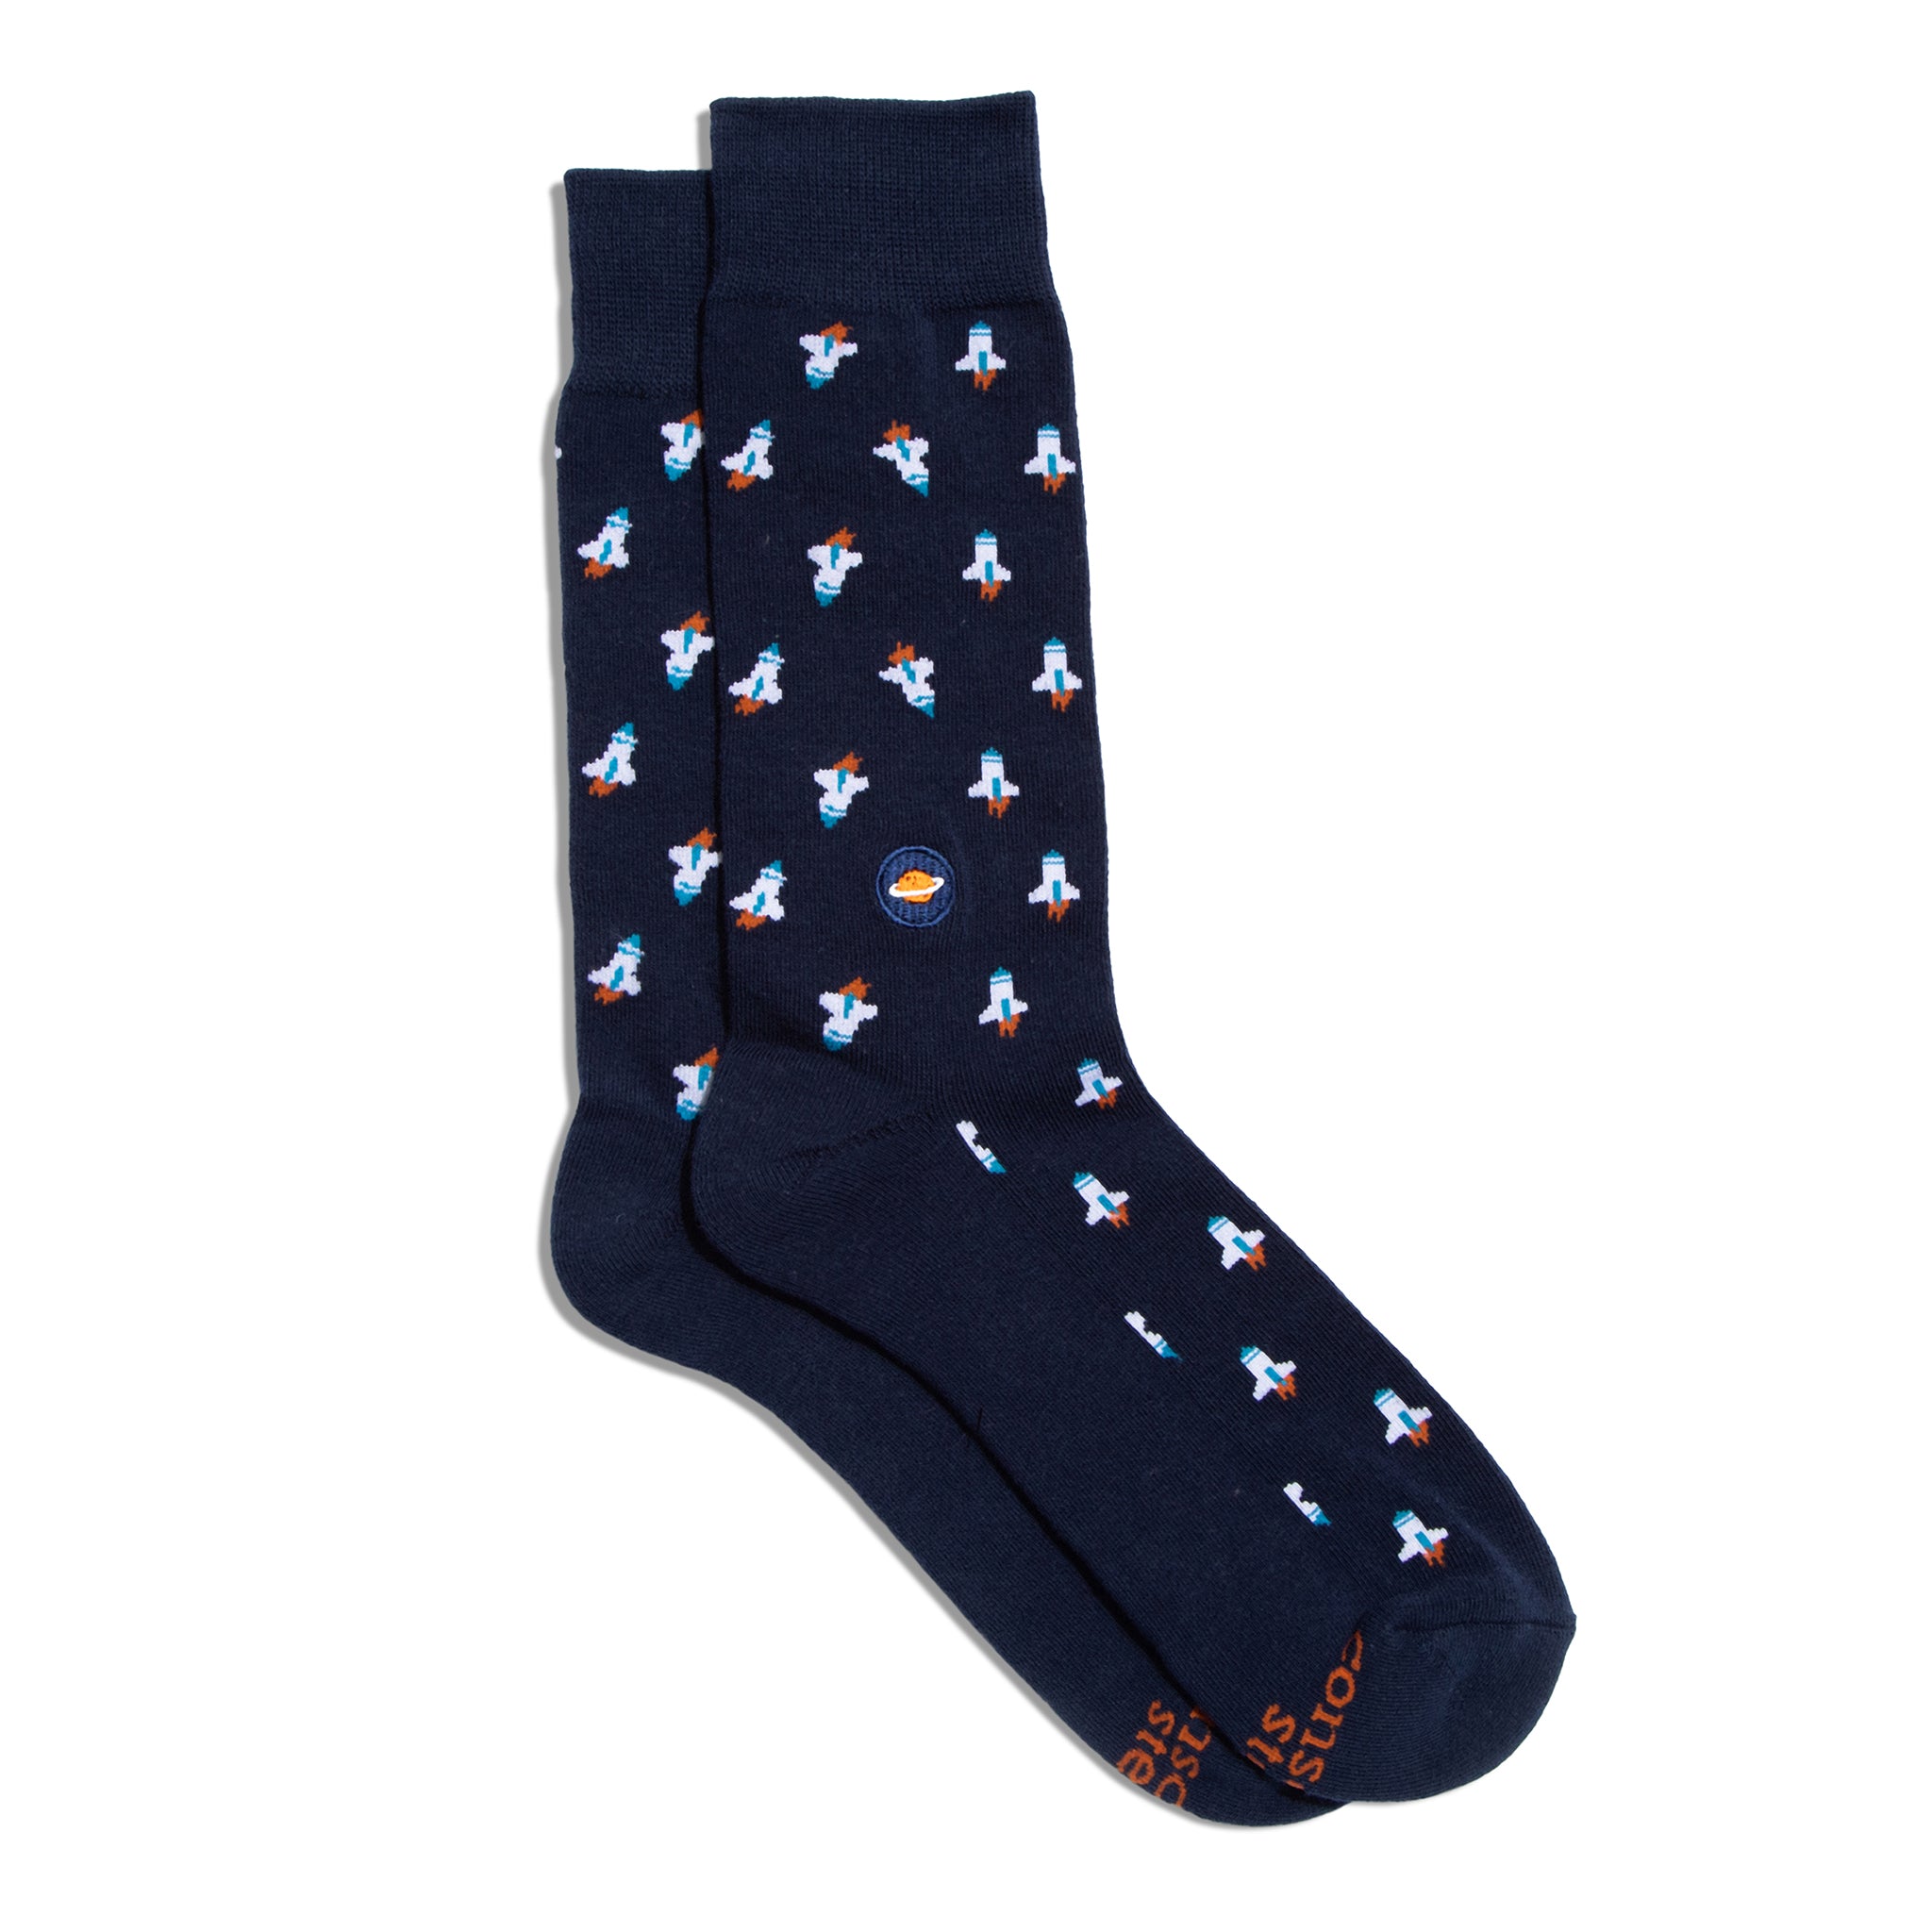 Image of Socks that Support Space Exploration